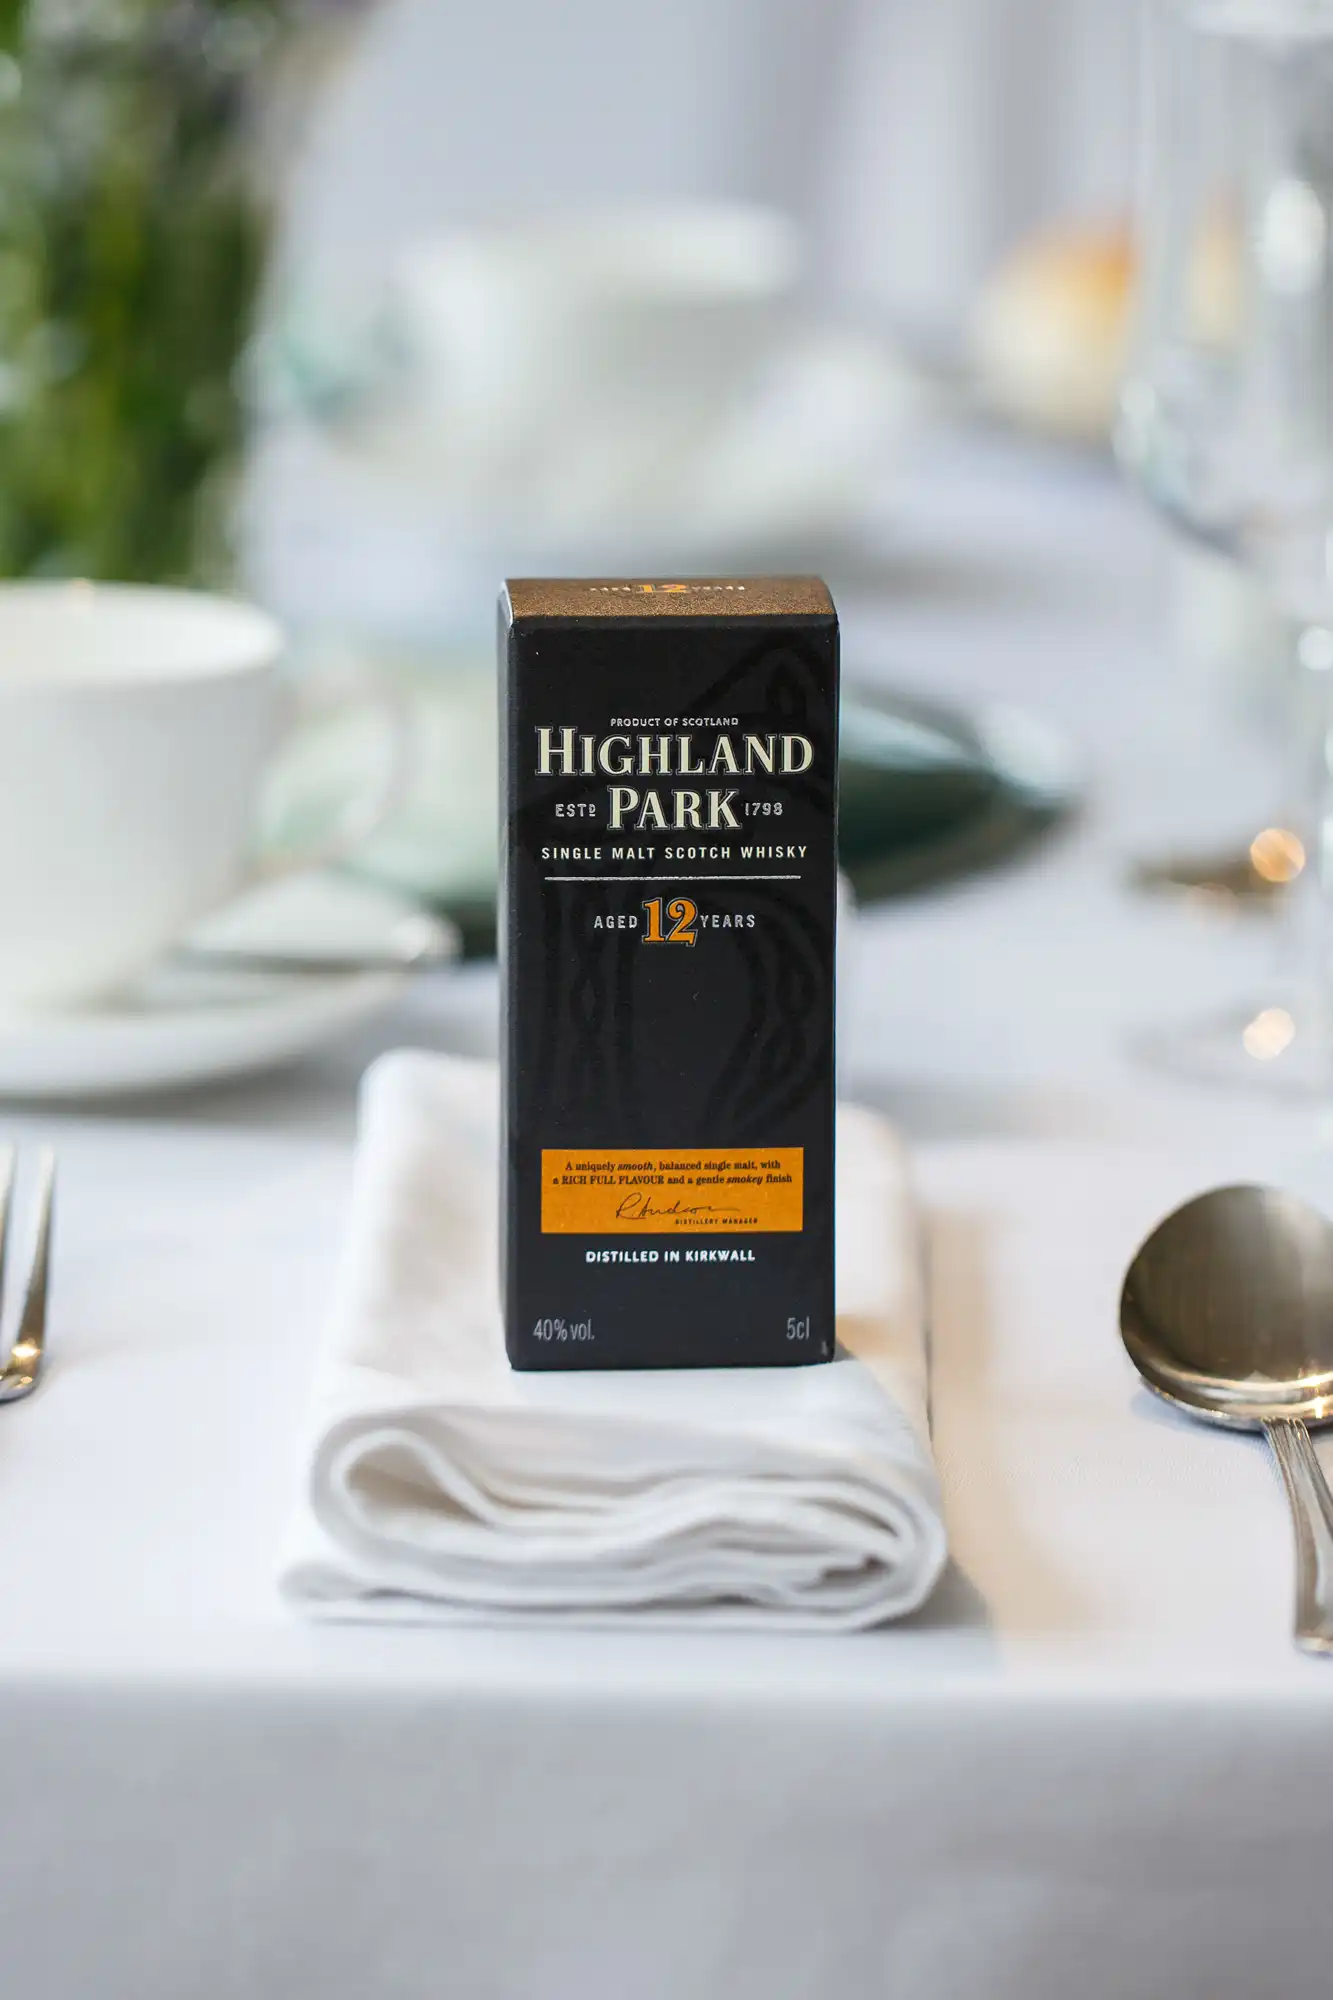 A bottle of highland park 12-year-old single malt scotch whisky on a dining table, set with white linen and silverware.